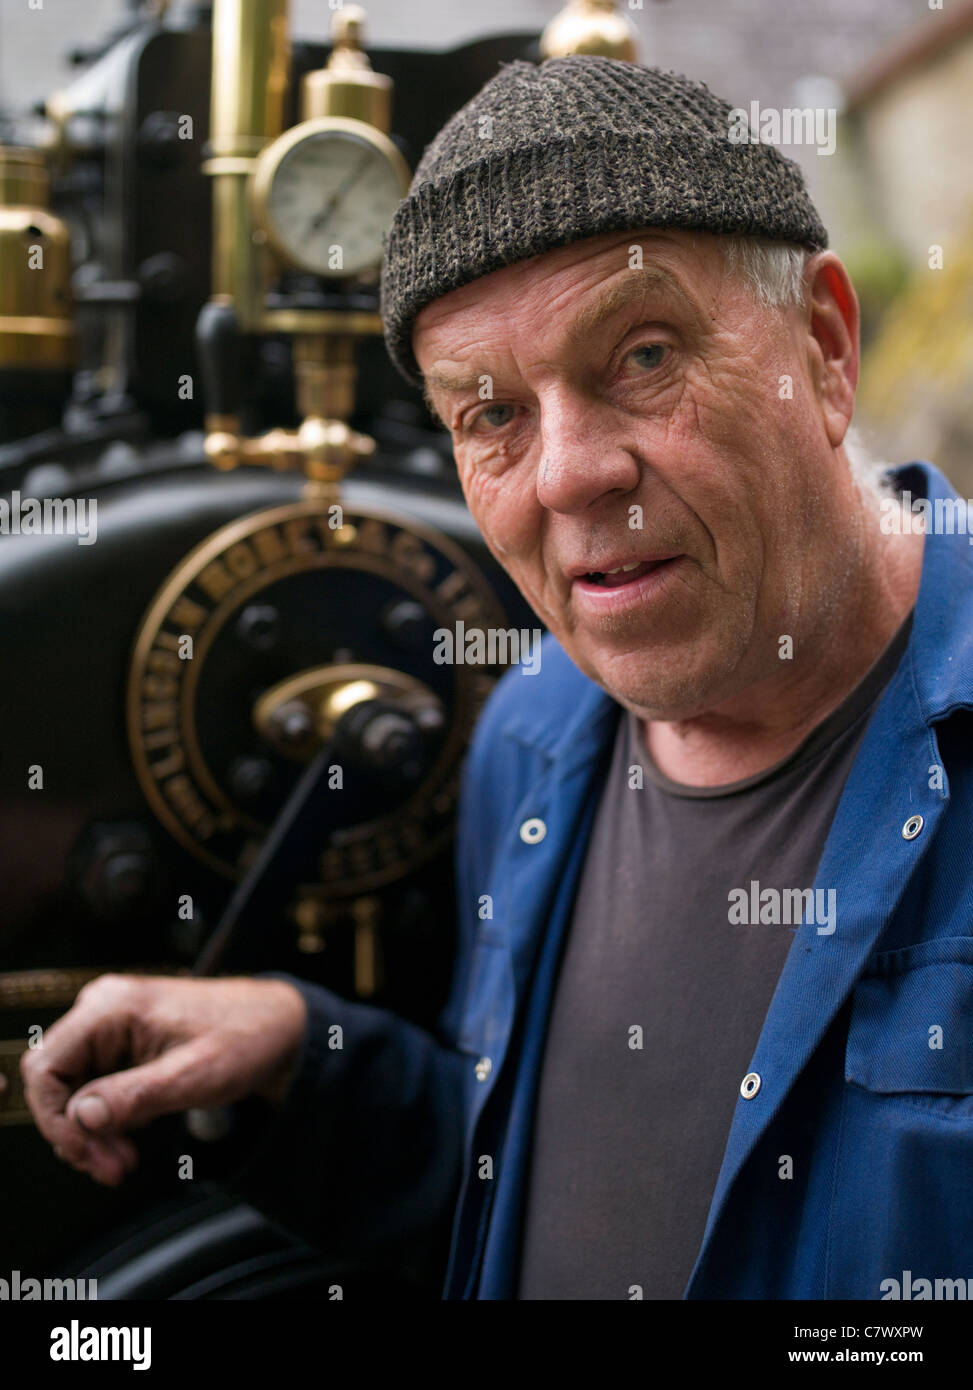 Engineer / Mechanic at Beamish, The North of England Open Air Museum County Durham Stock Photo